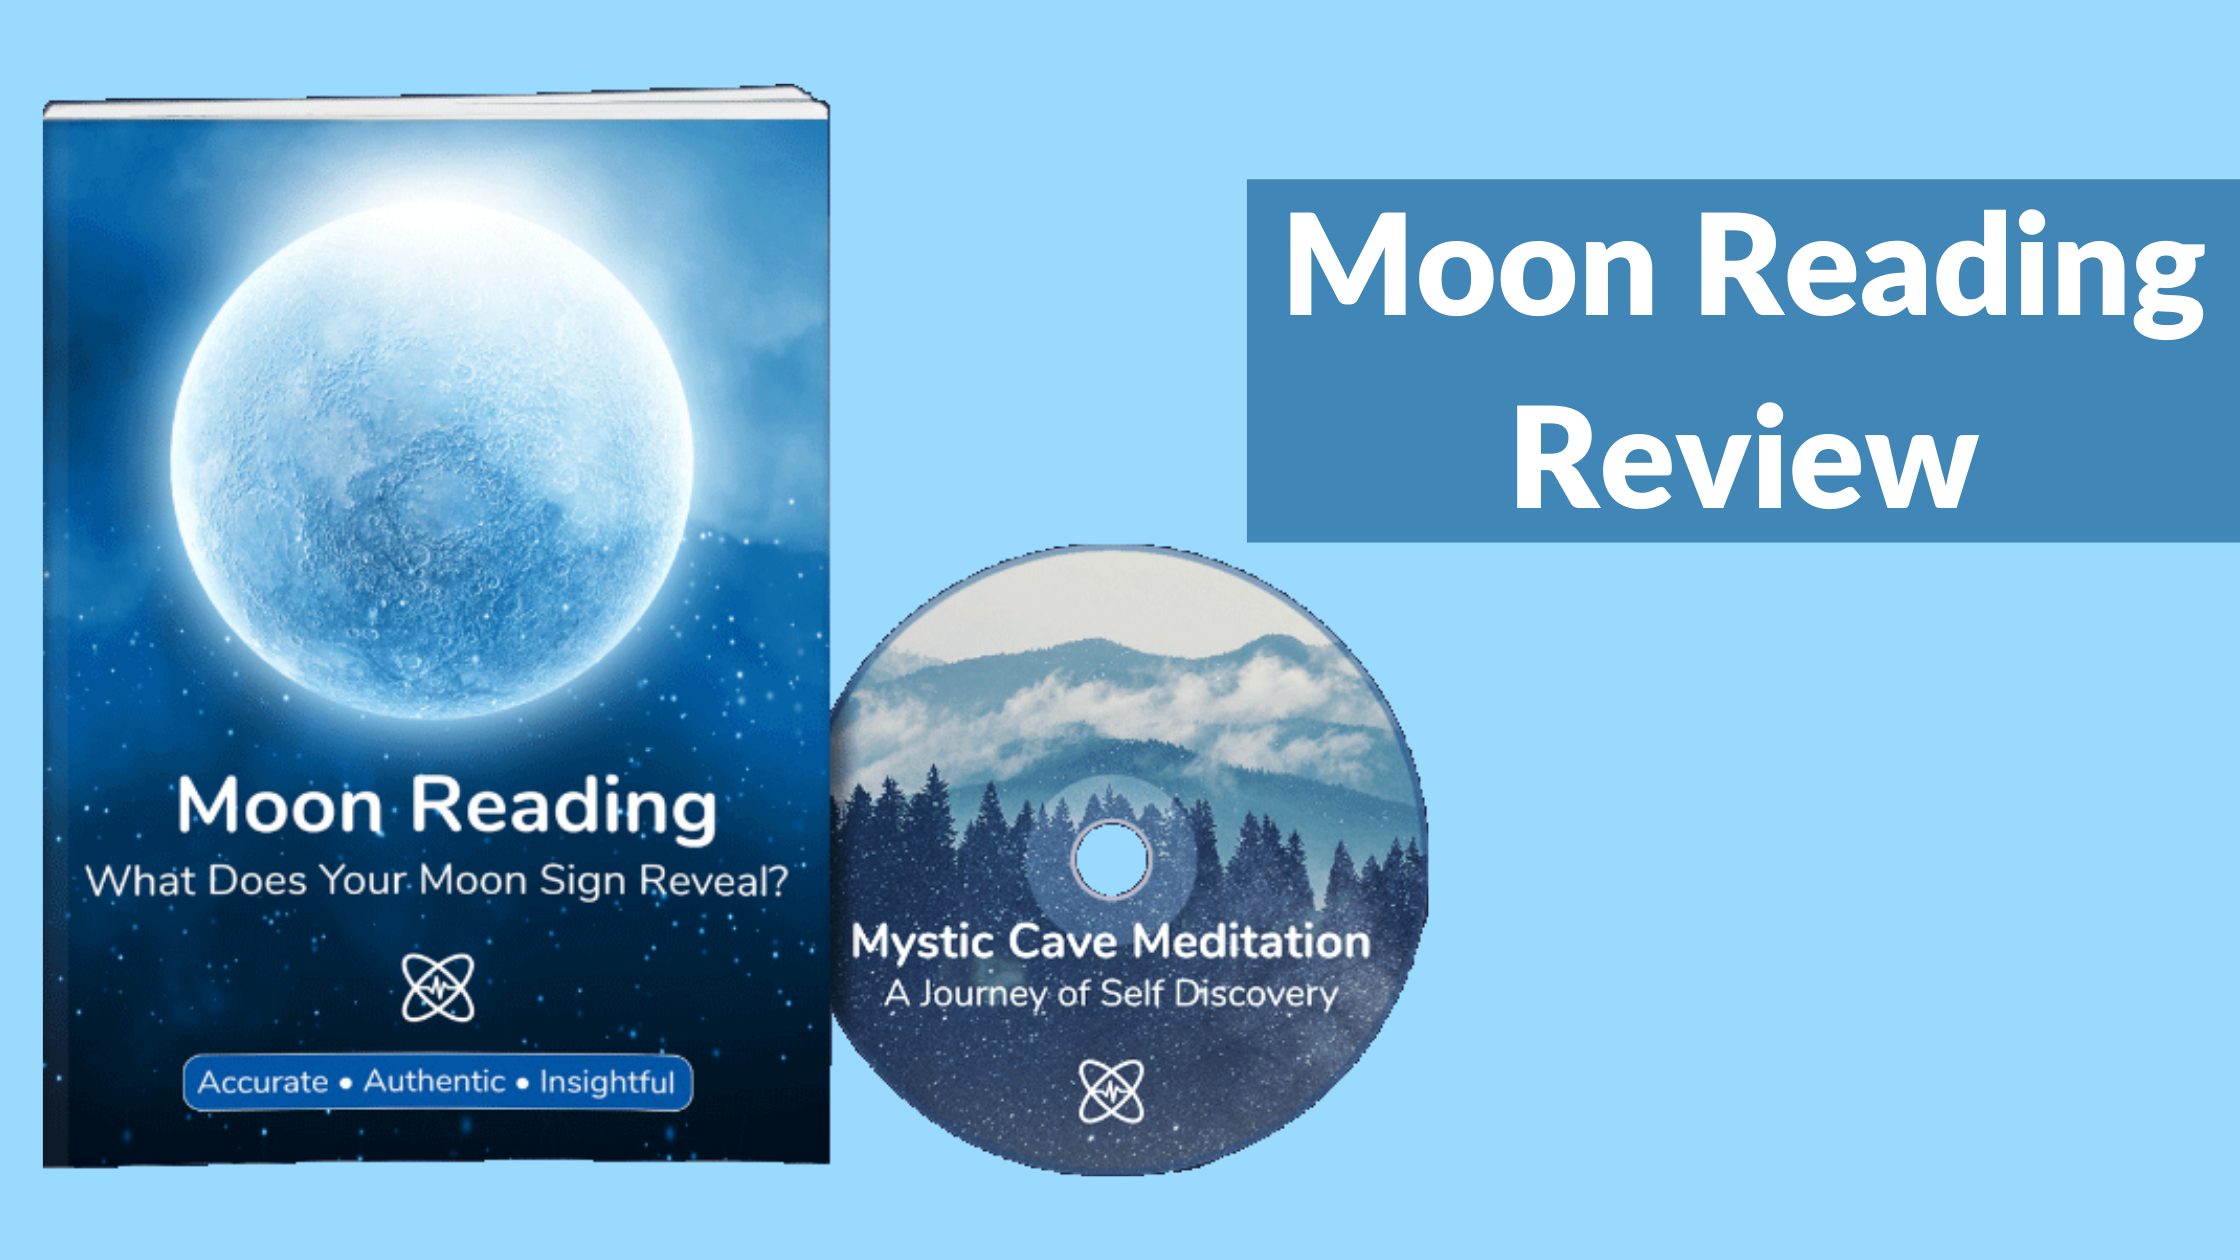 What Your Customers Really Think About Your Moon Reading Review?